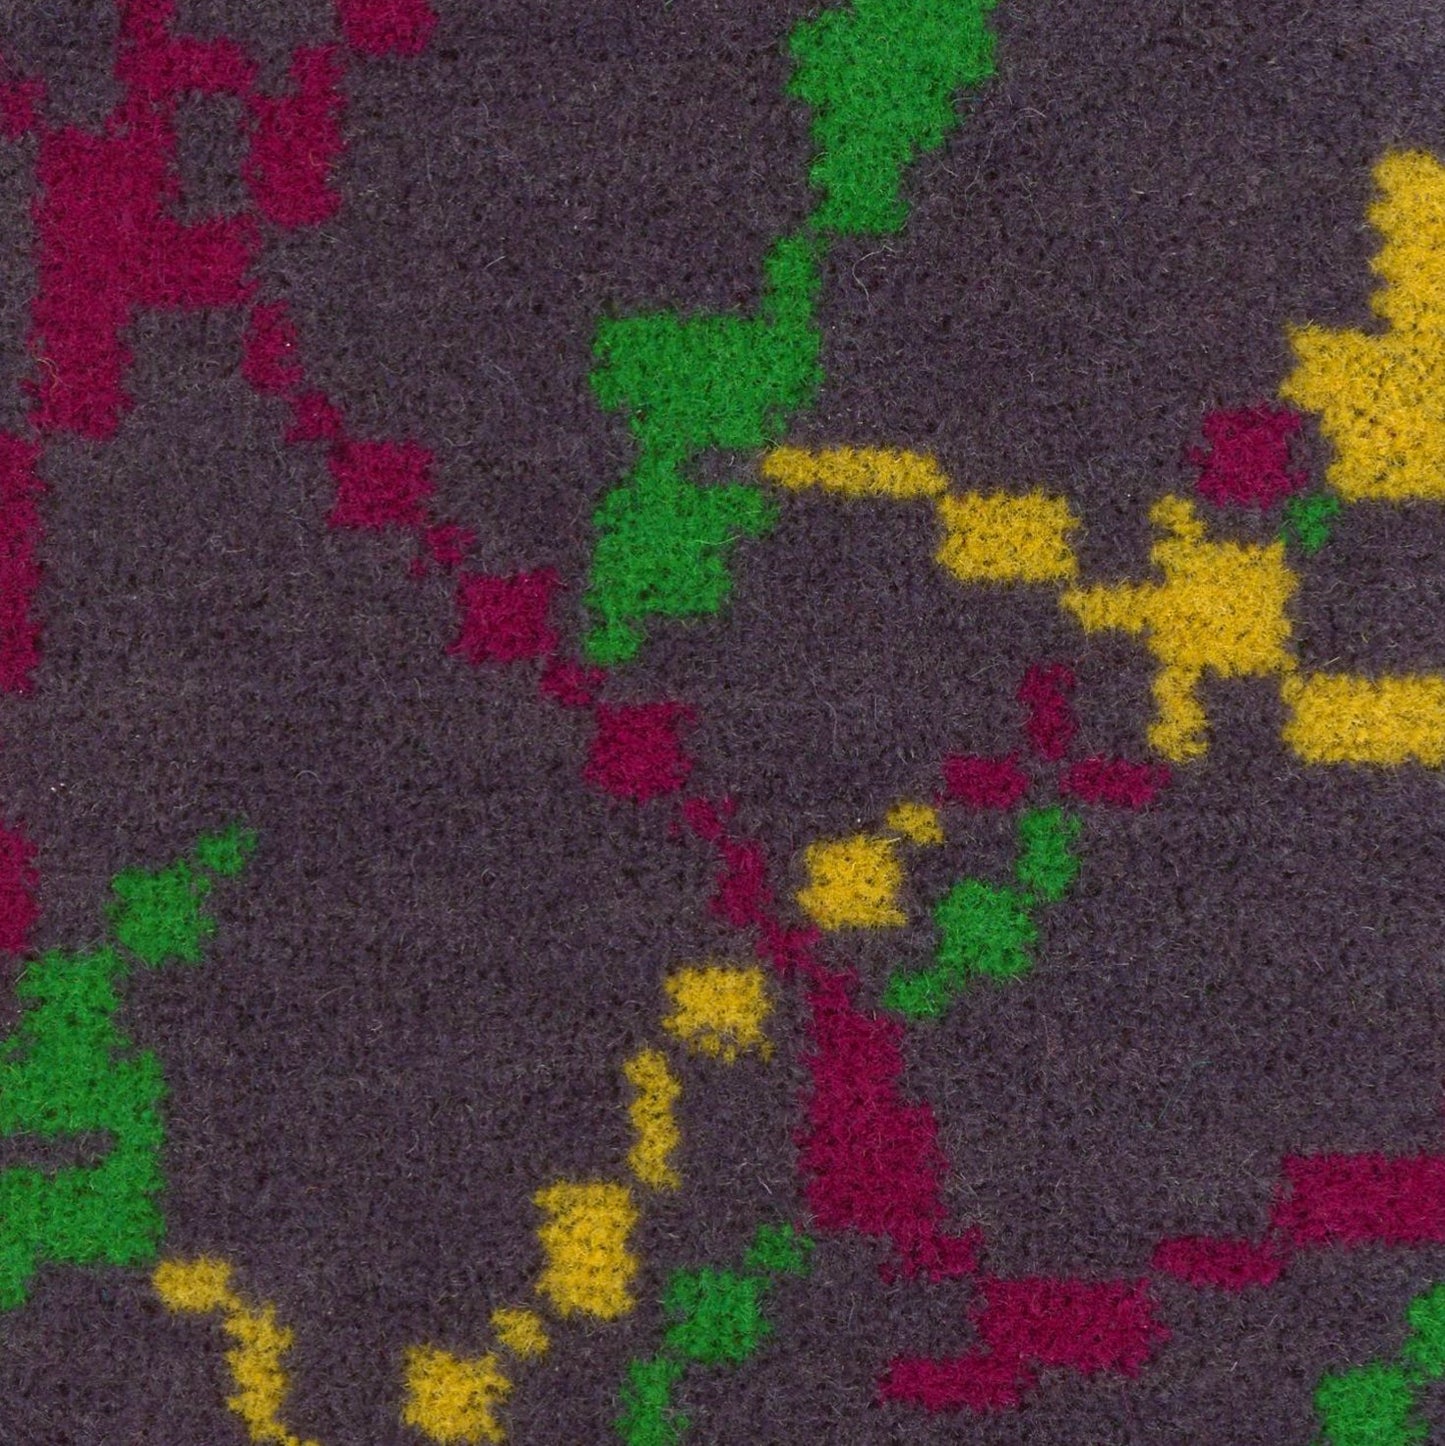 London Underground Hammersmith and City Line Moquette Fabric sold by the Metre